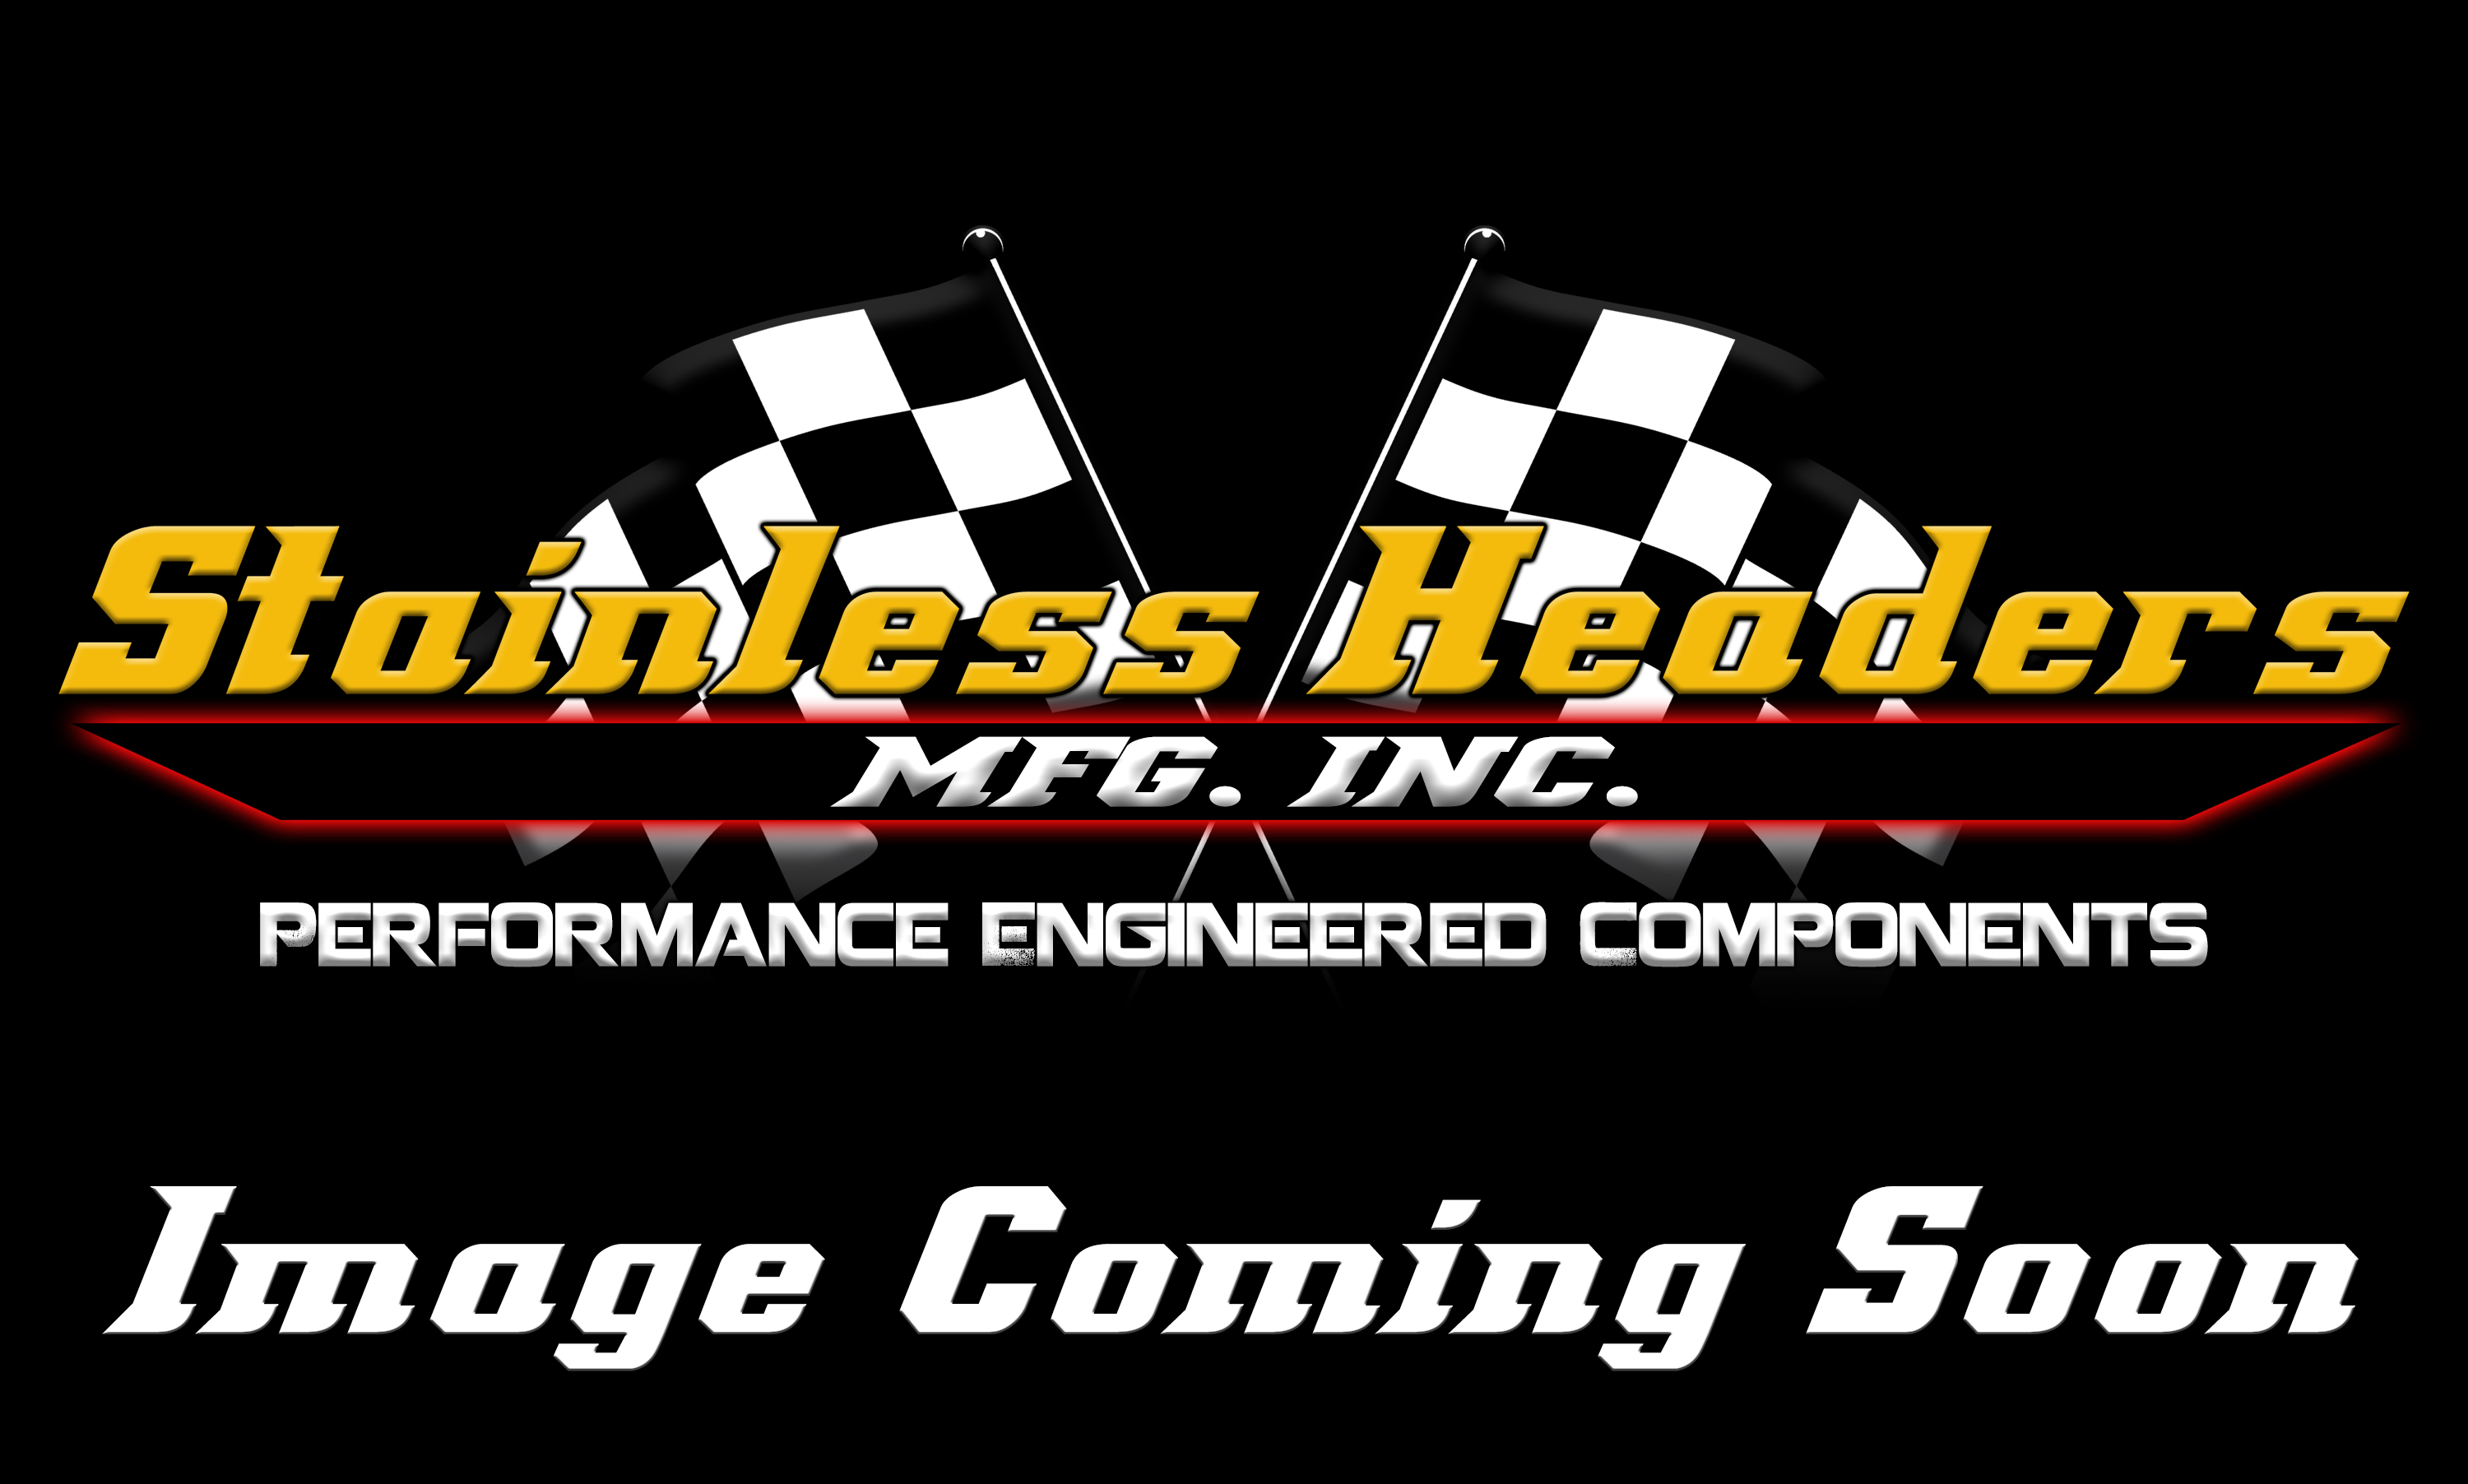 Merge Collectors - 321 Stainless Steel Merge Collectors - Stainless Headers - 2 1/2" Primary 3 into 1 Performance Merge Collector-18ga 321ss